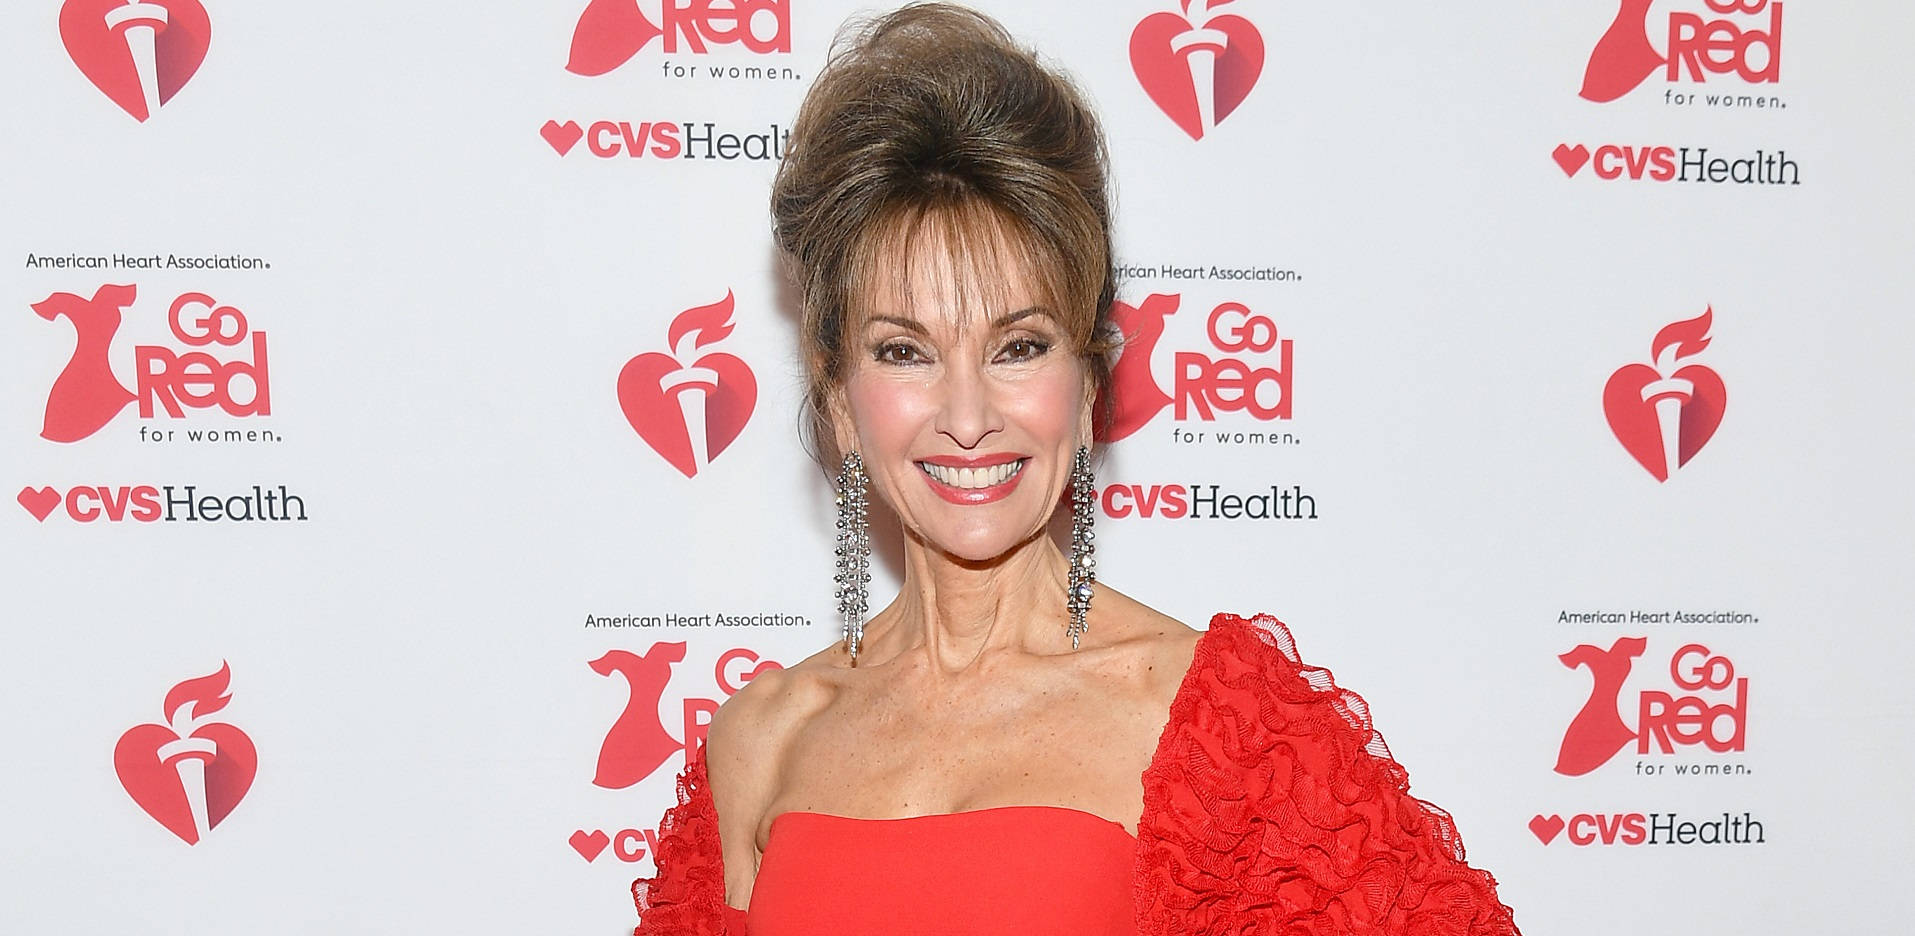 Susan Lucci Go Red Event Background